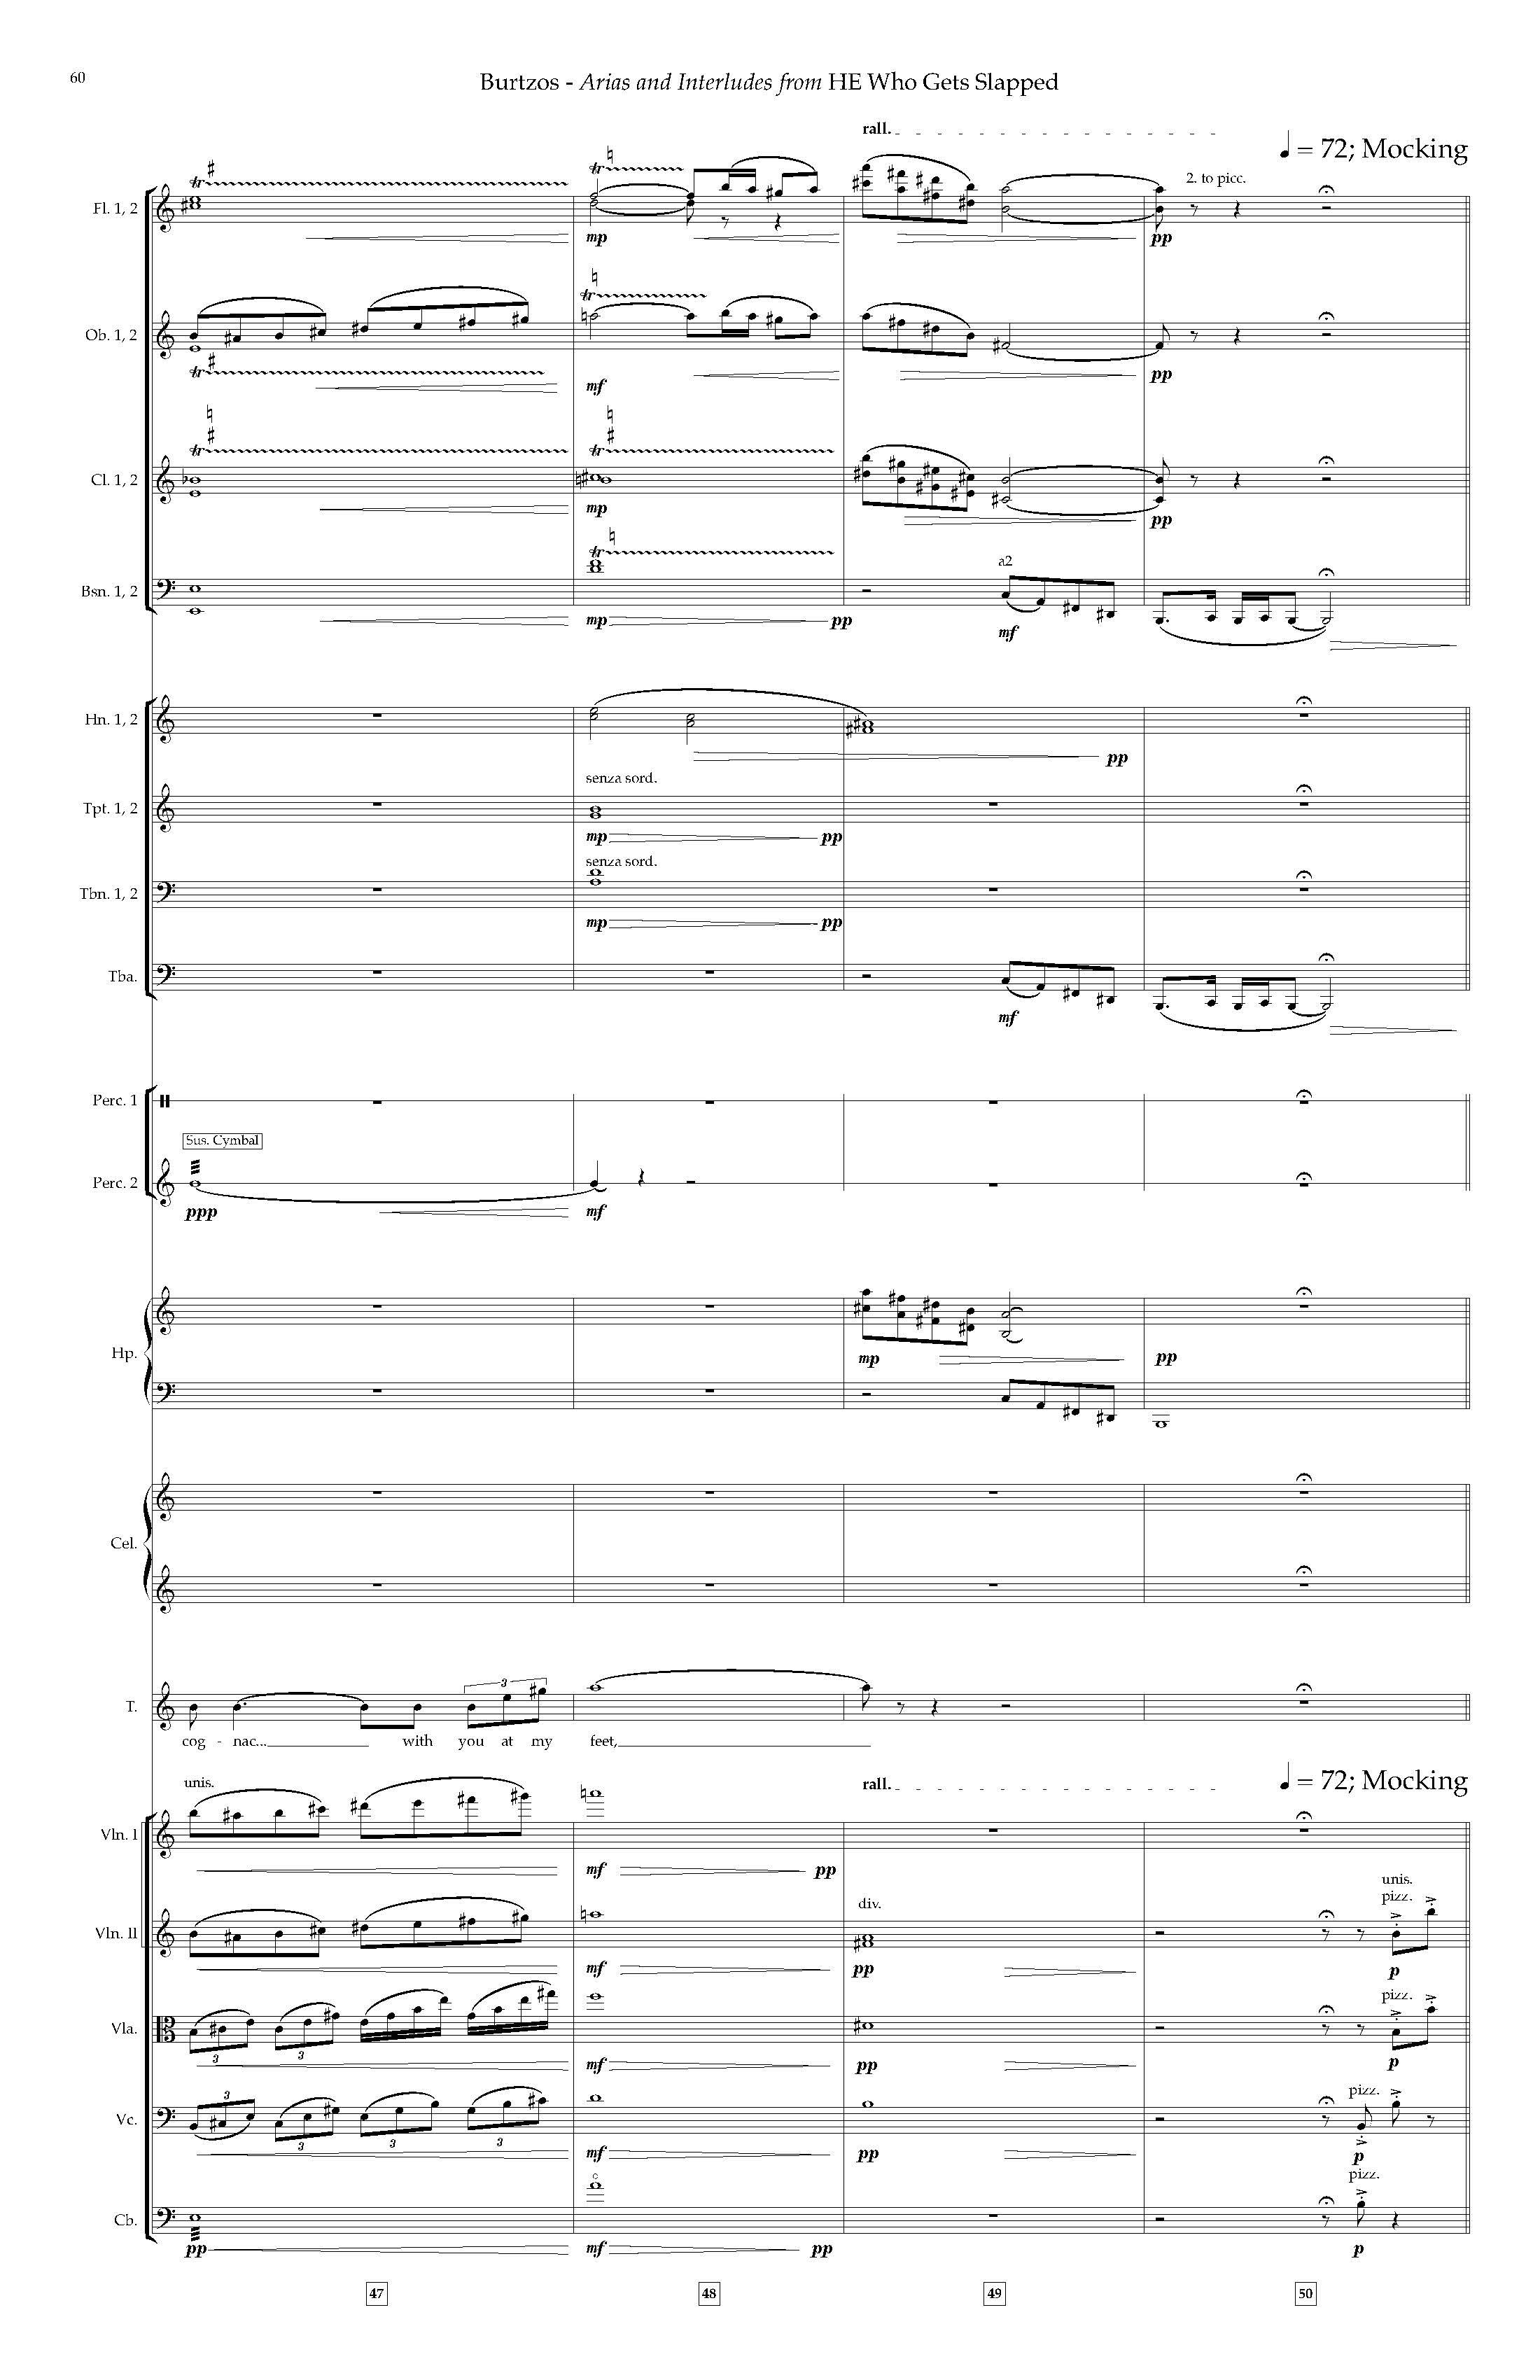 Arias and Interludes from HWGS - Complete Score_Page_66.jpg